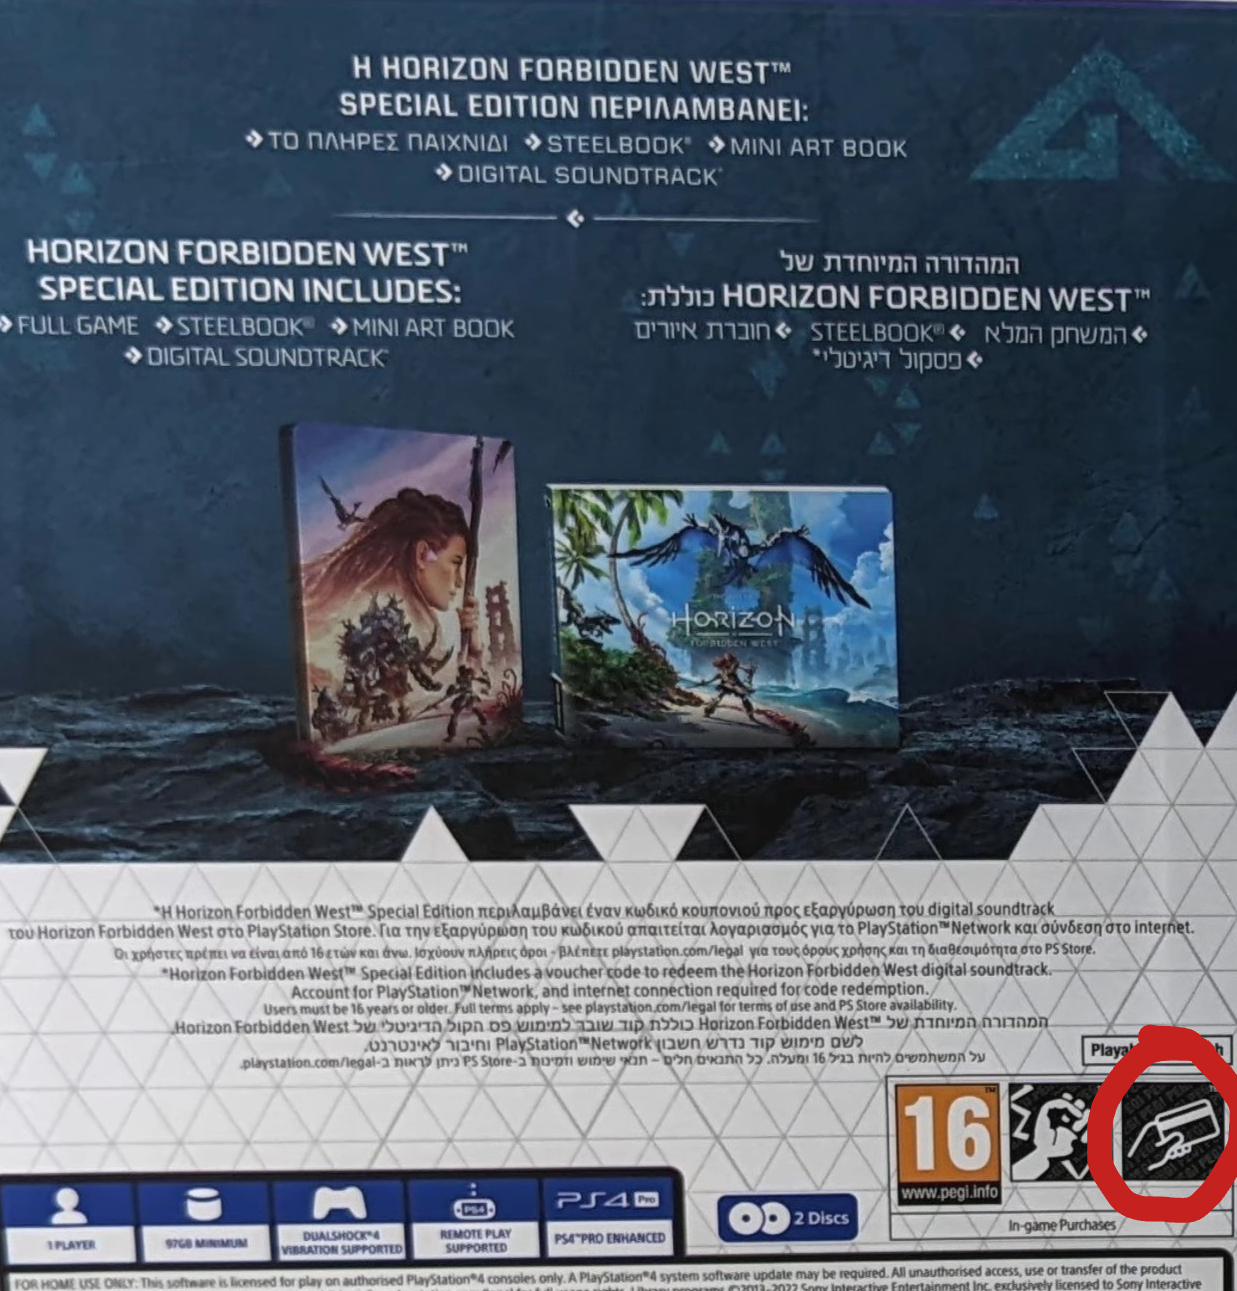 back DLC expansions and Online Store leaked for Horizon Forbidden West | VGLeaks 2.0